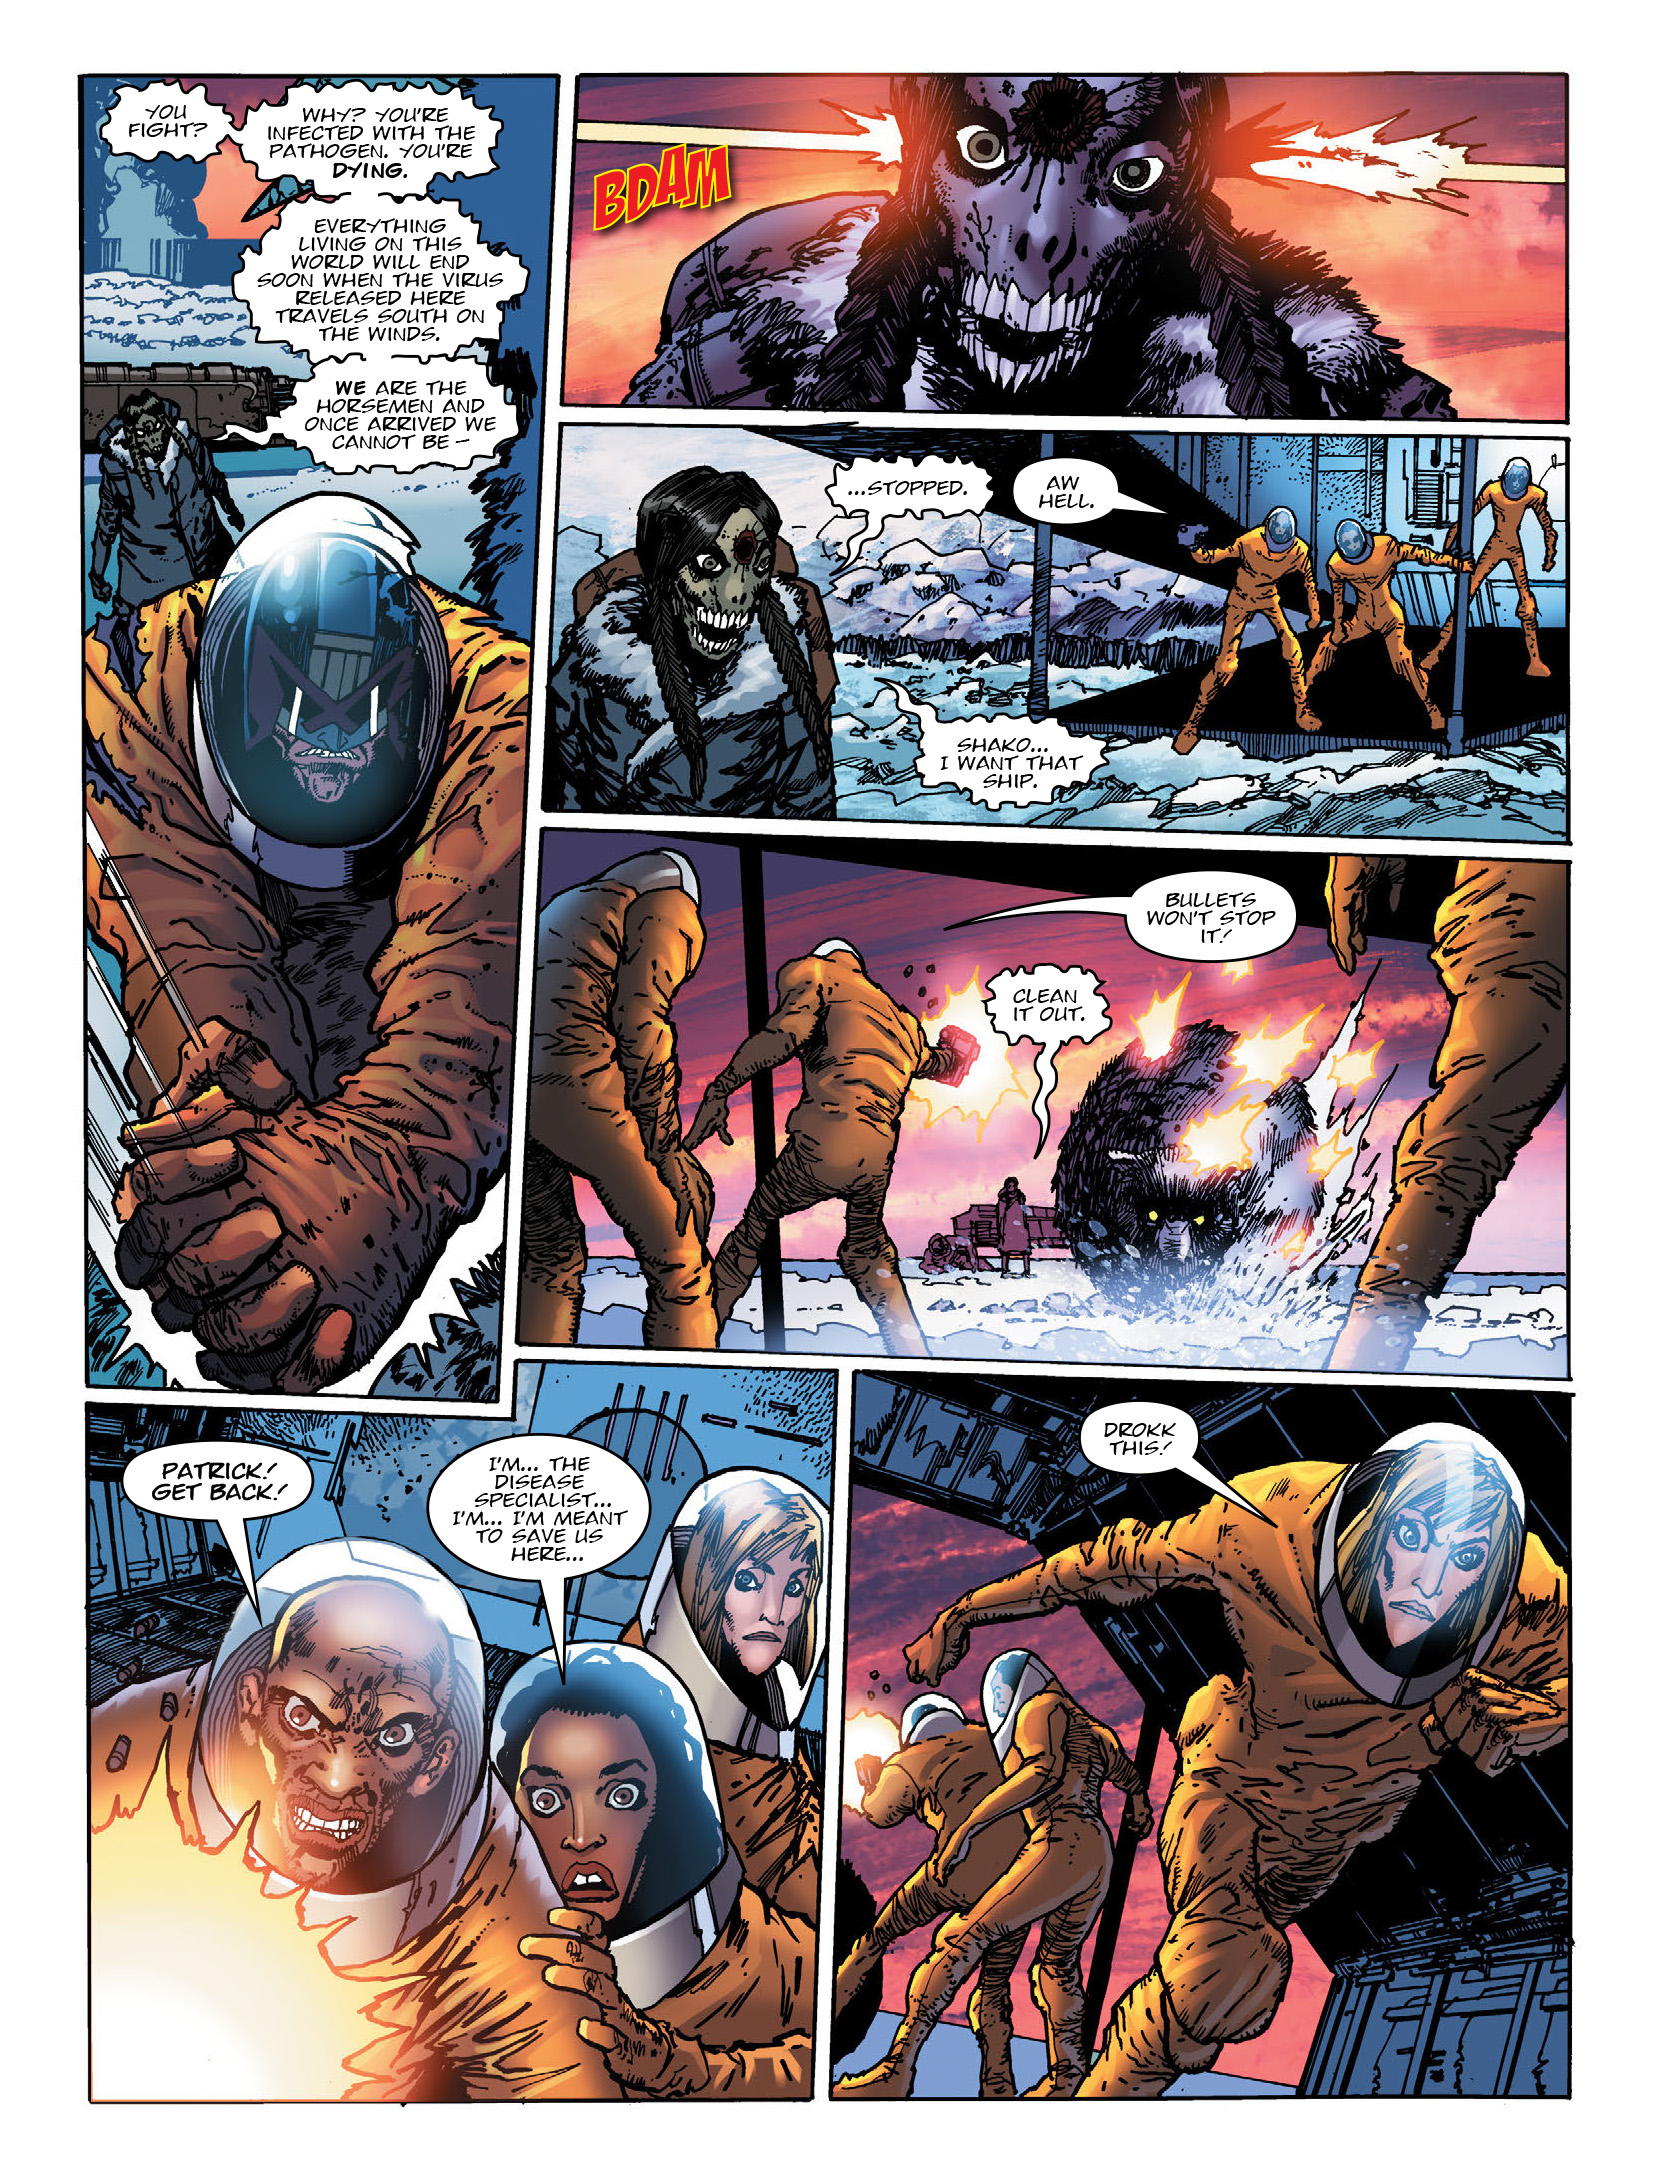 2000 AD: Chapter 2192 - Page 4